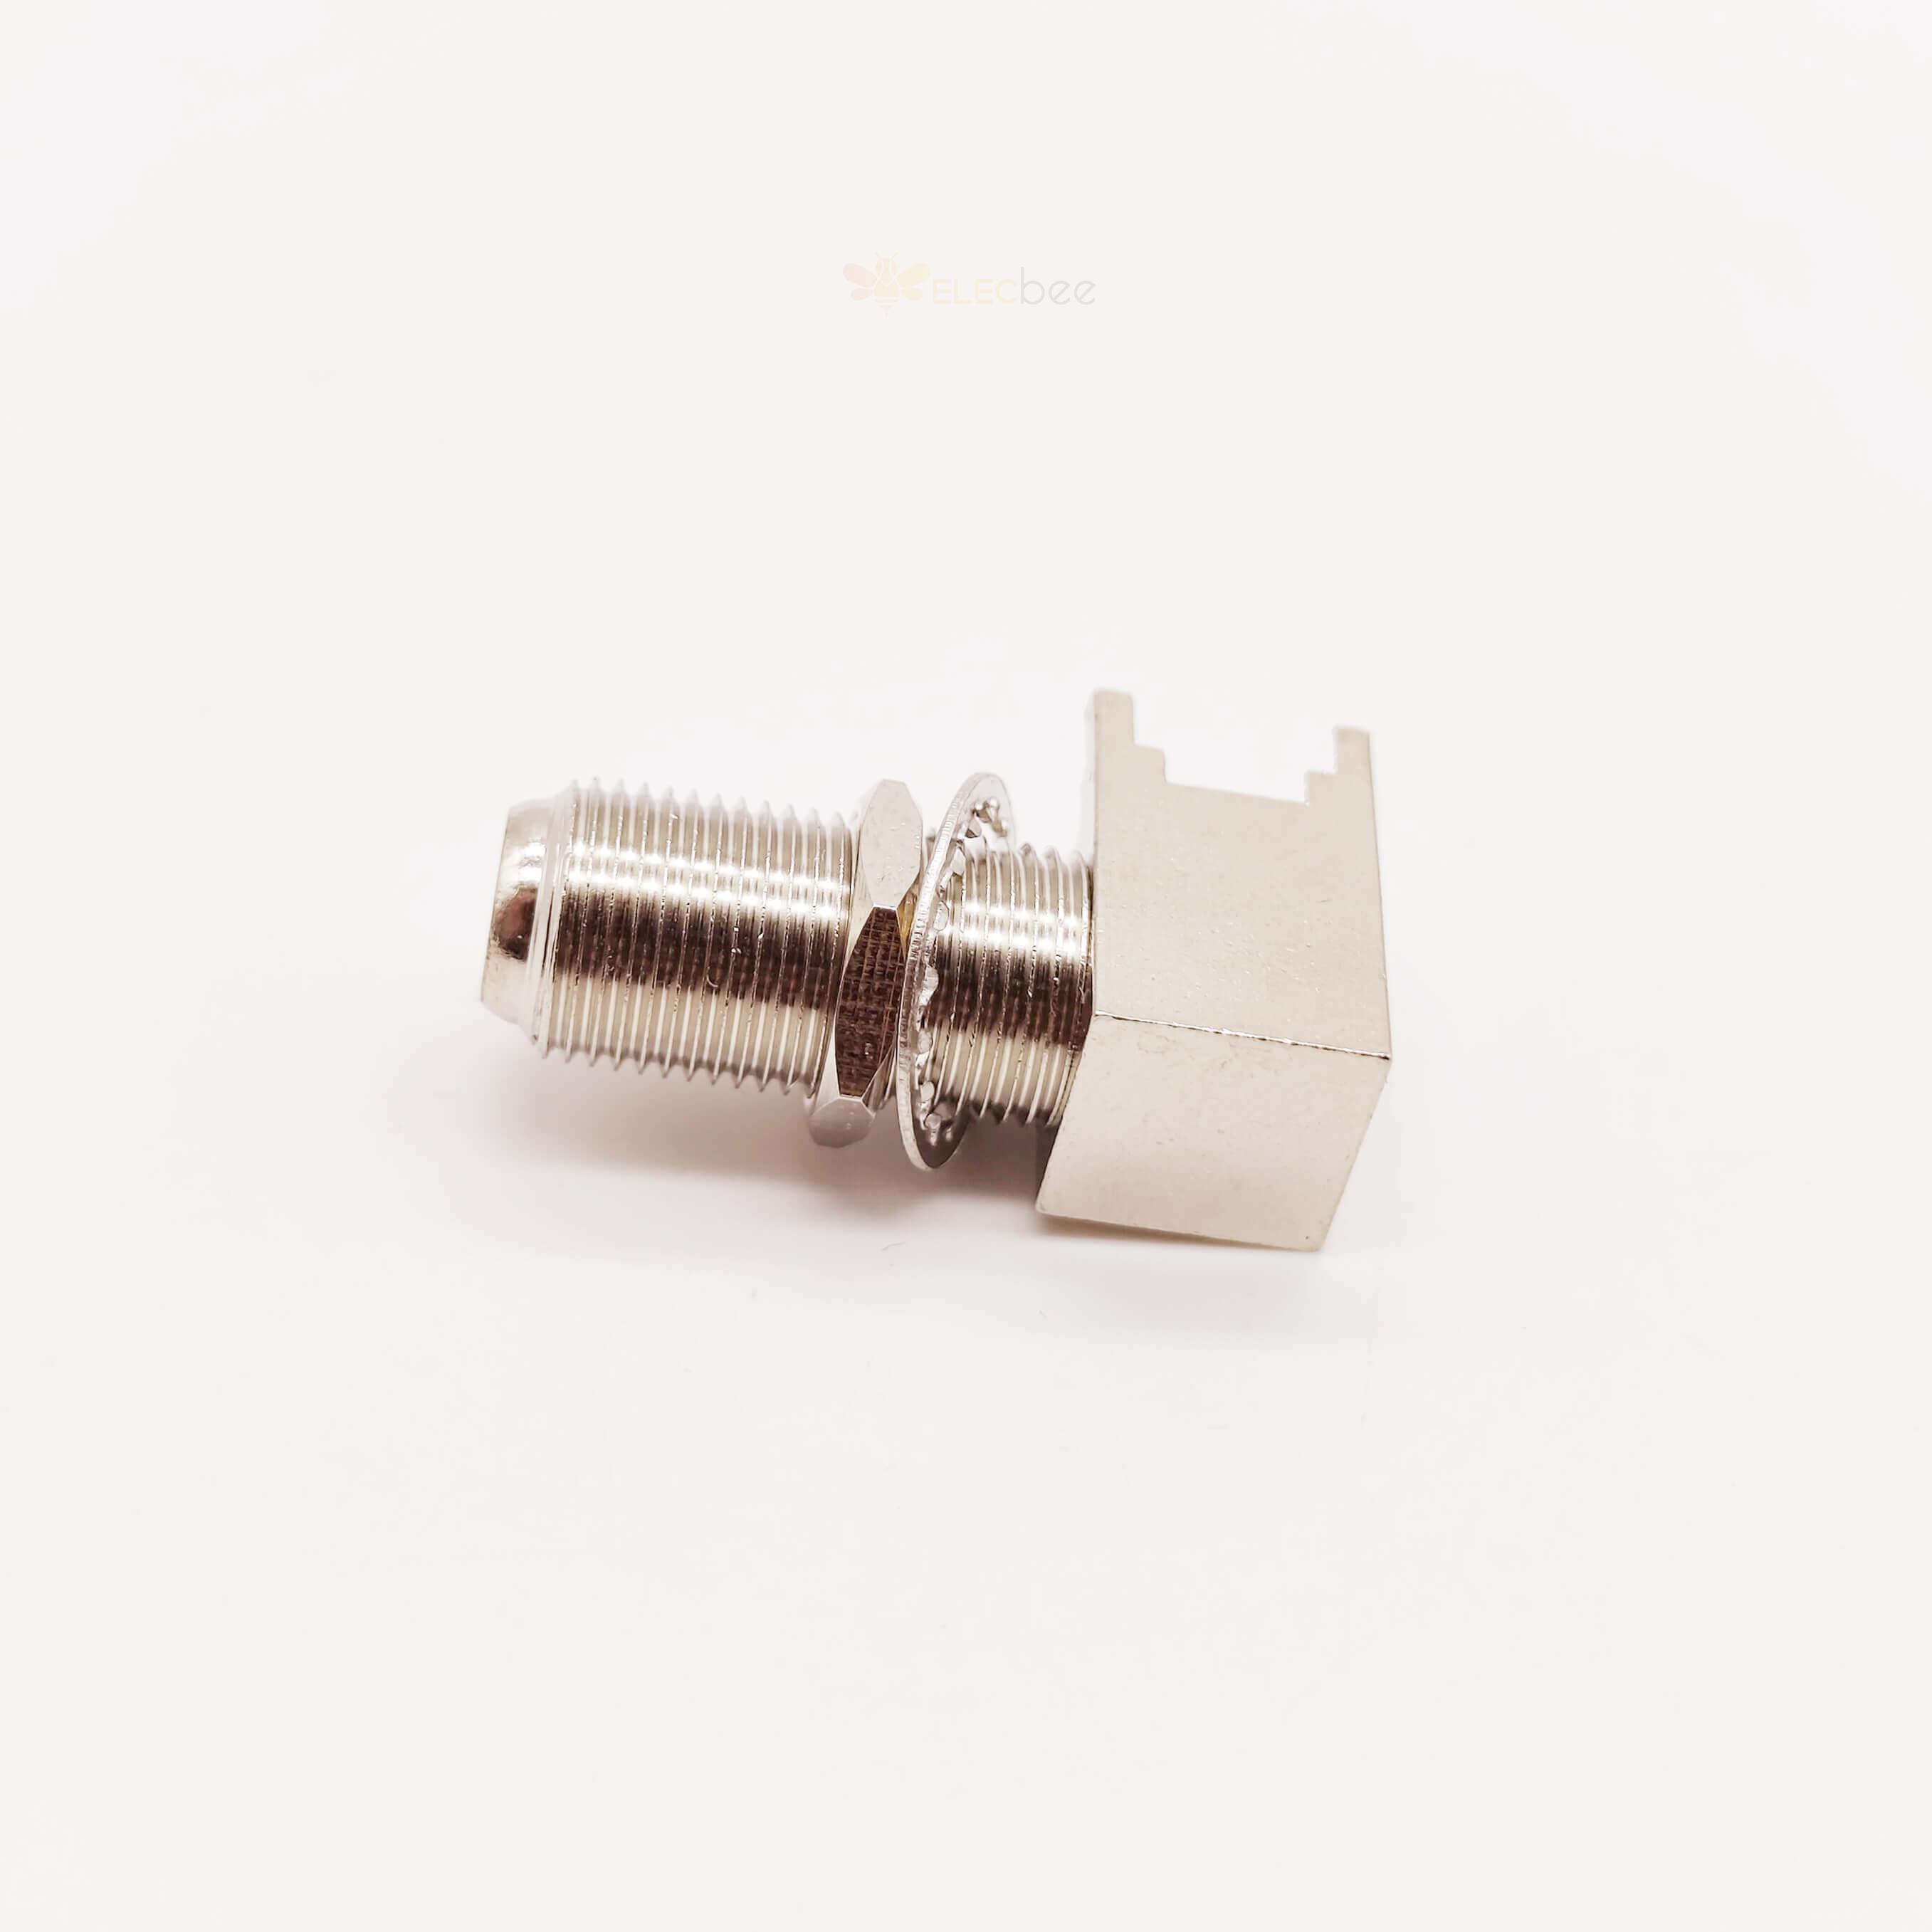 90 Degree F Type Connector Female Bulkhead for PCB Mount